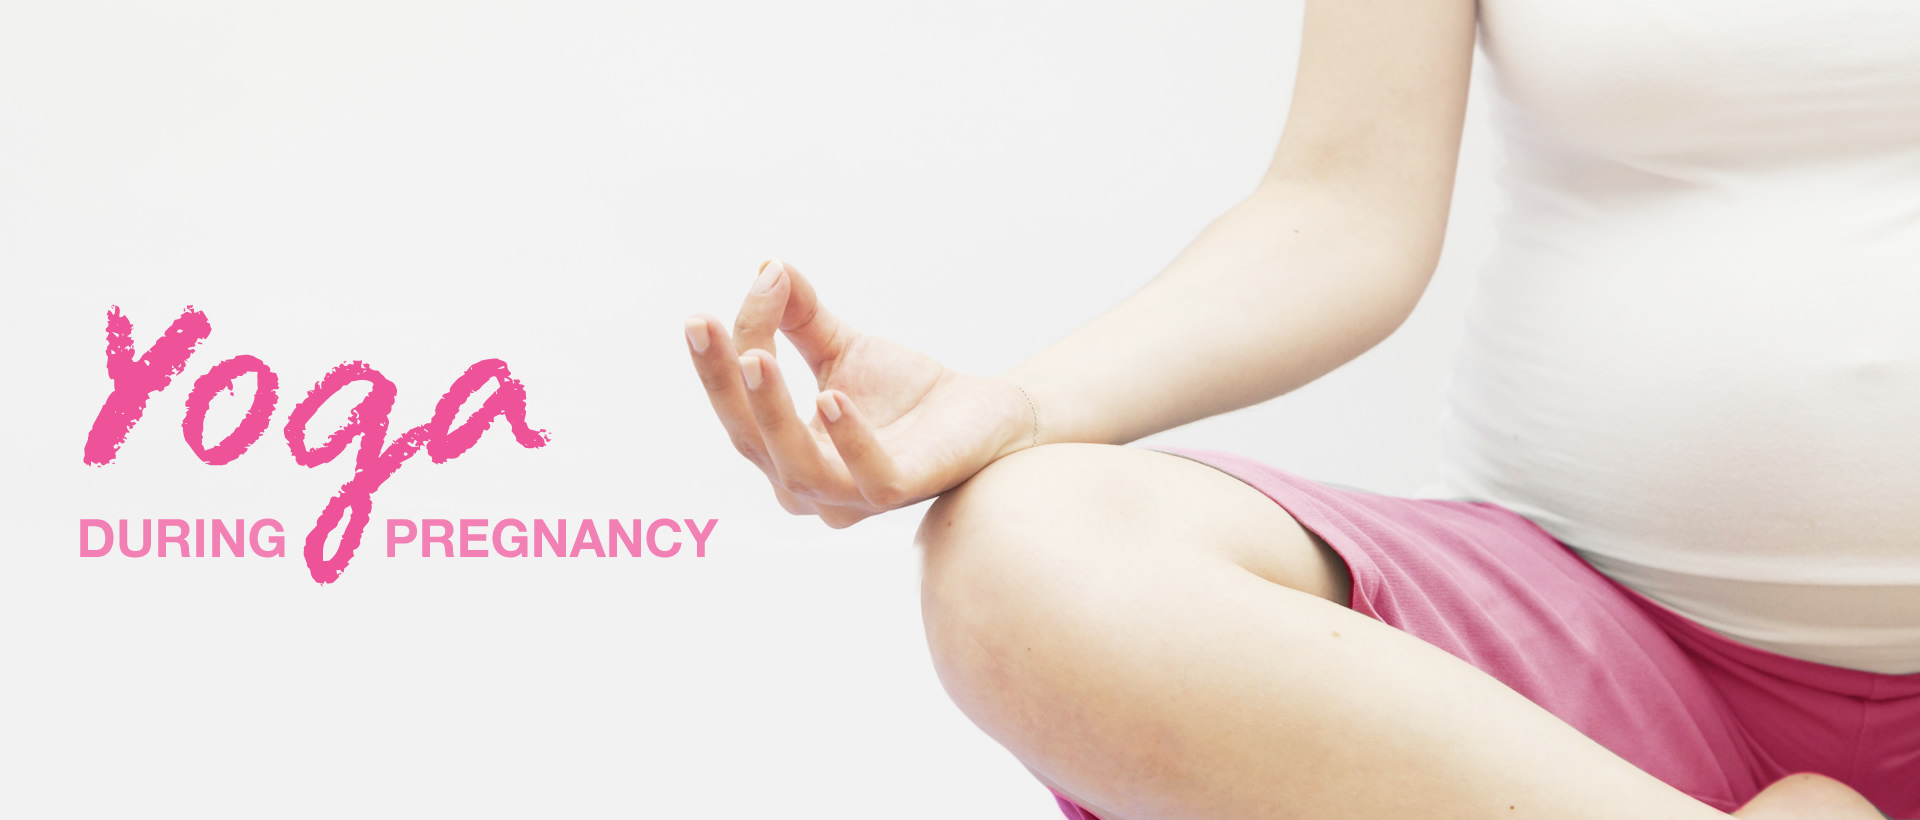 Yoga and pregnancy - The do's and don'ts